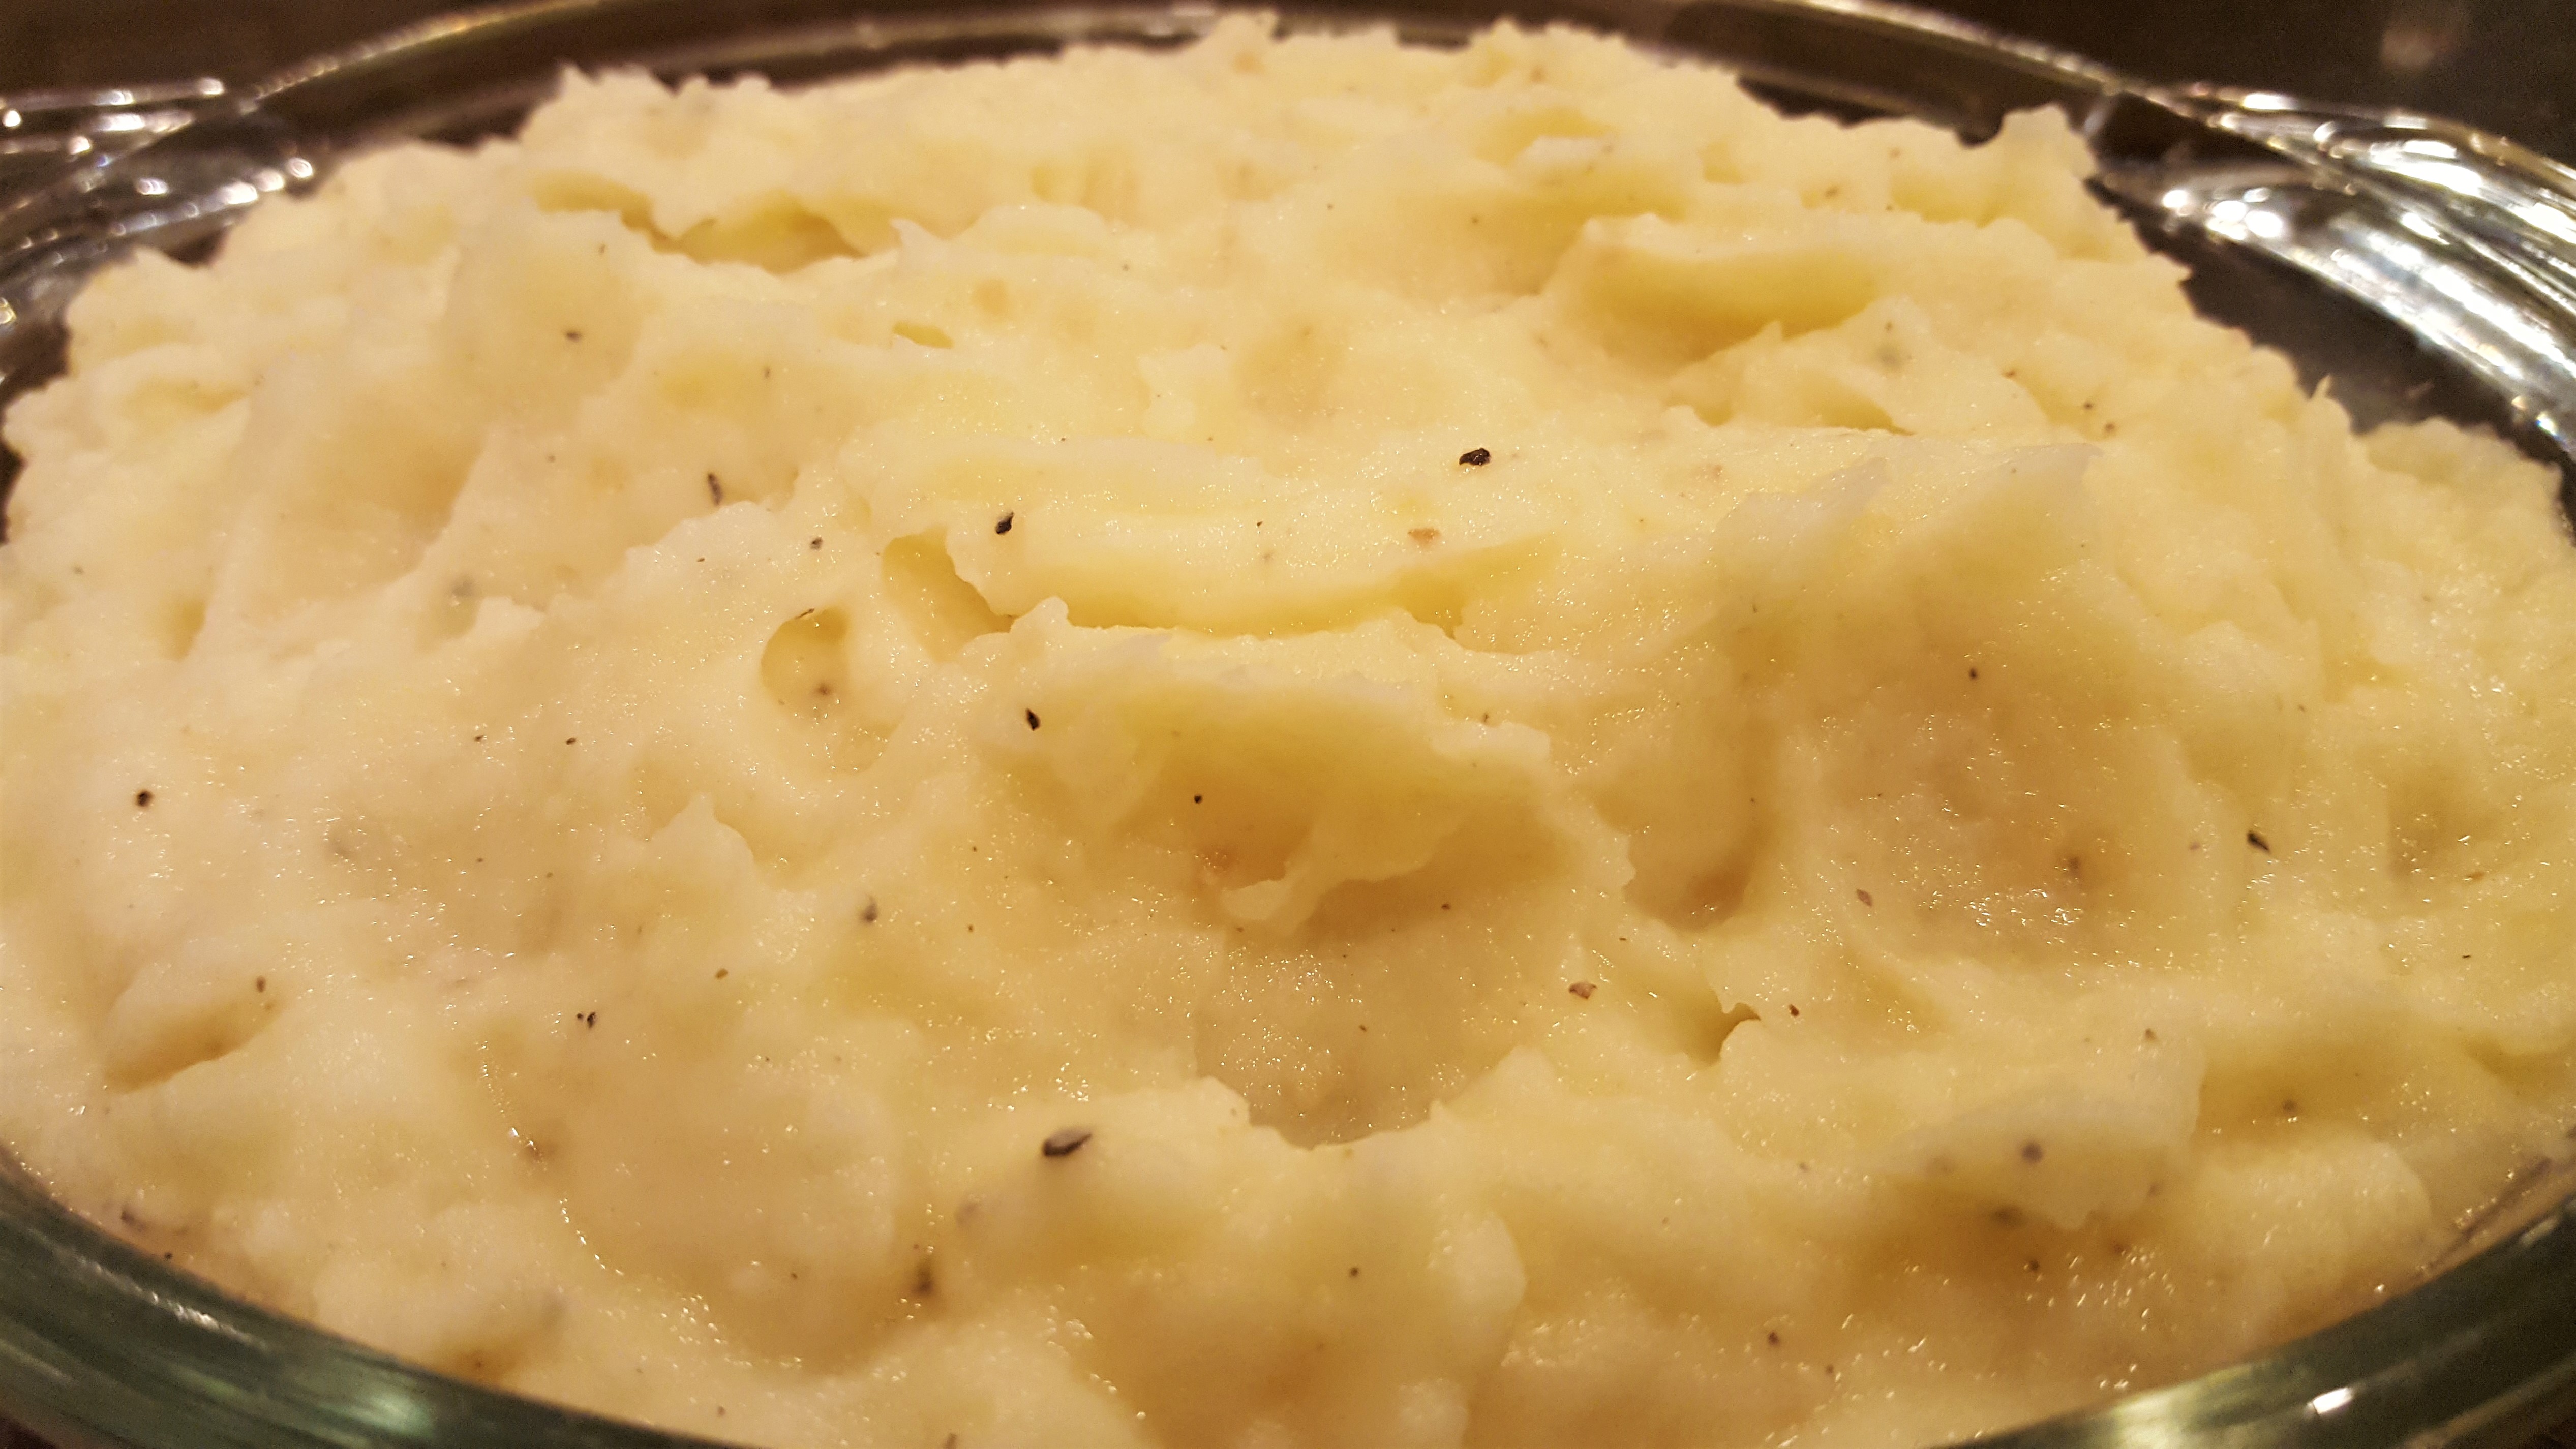 Delicious Creamy Mashed Potatoes ready to serve - Dining in with Danielle